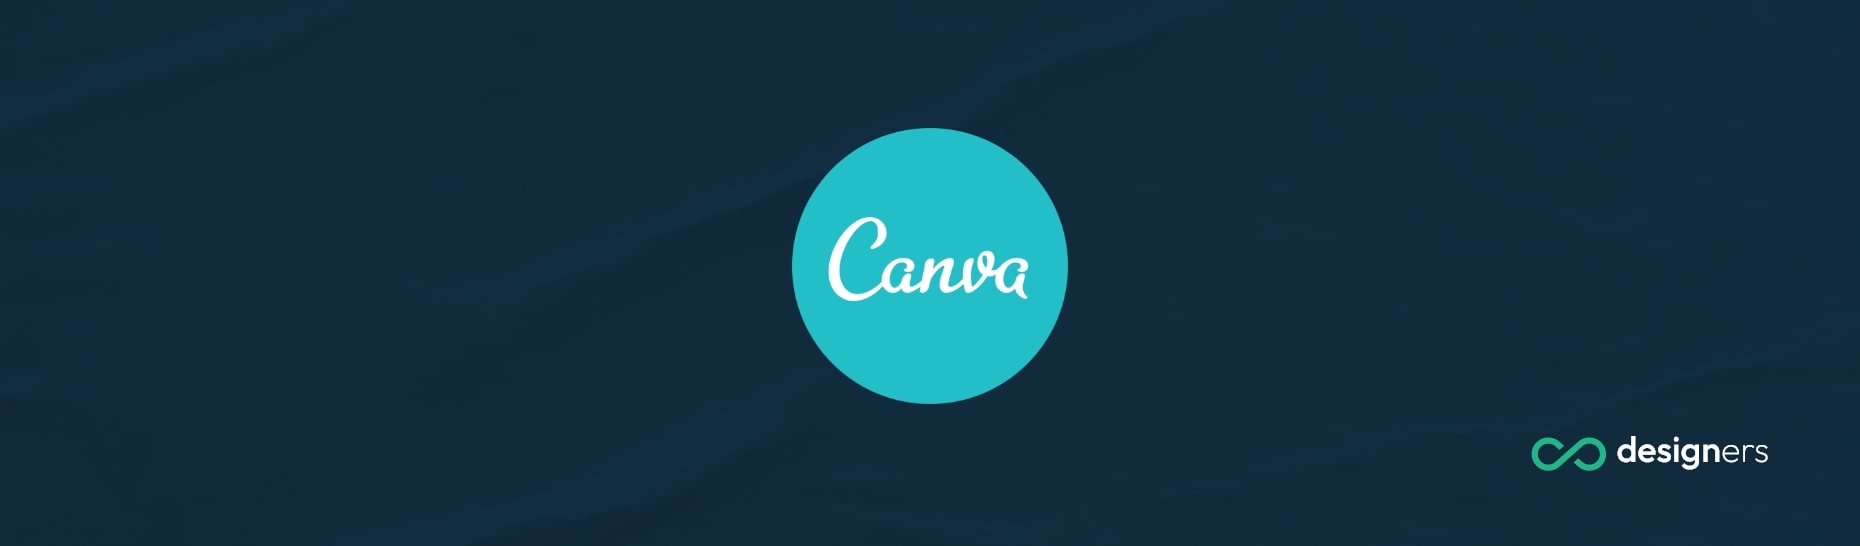 What Is Canva Really Good For?